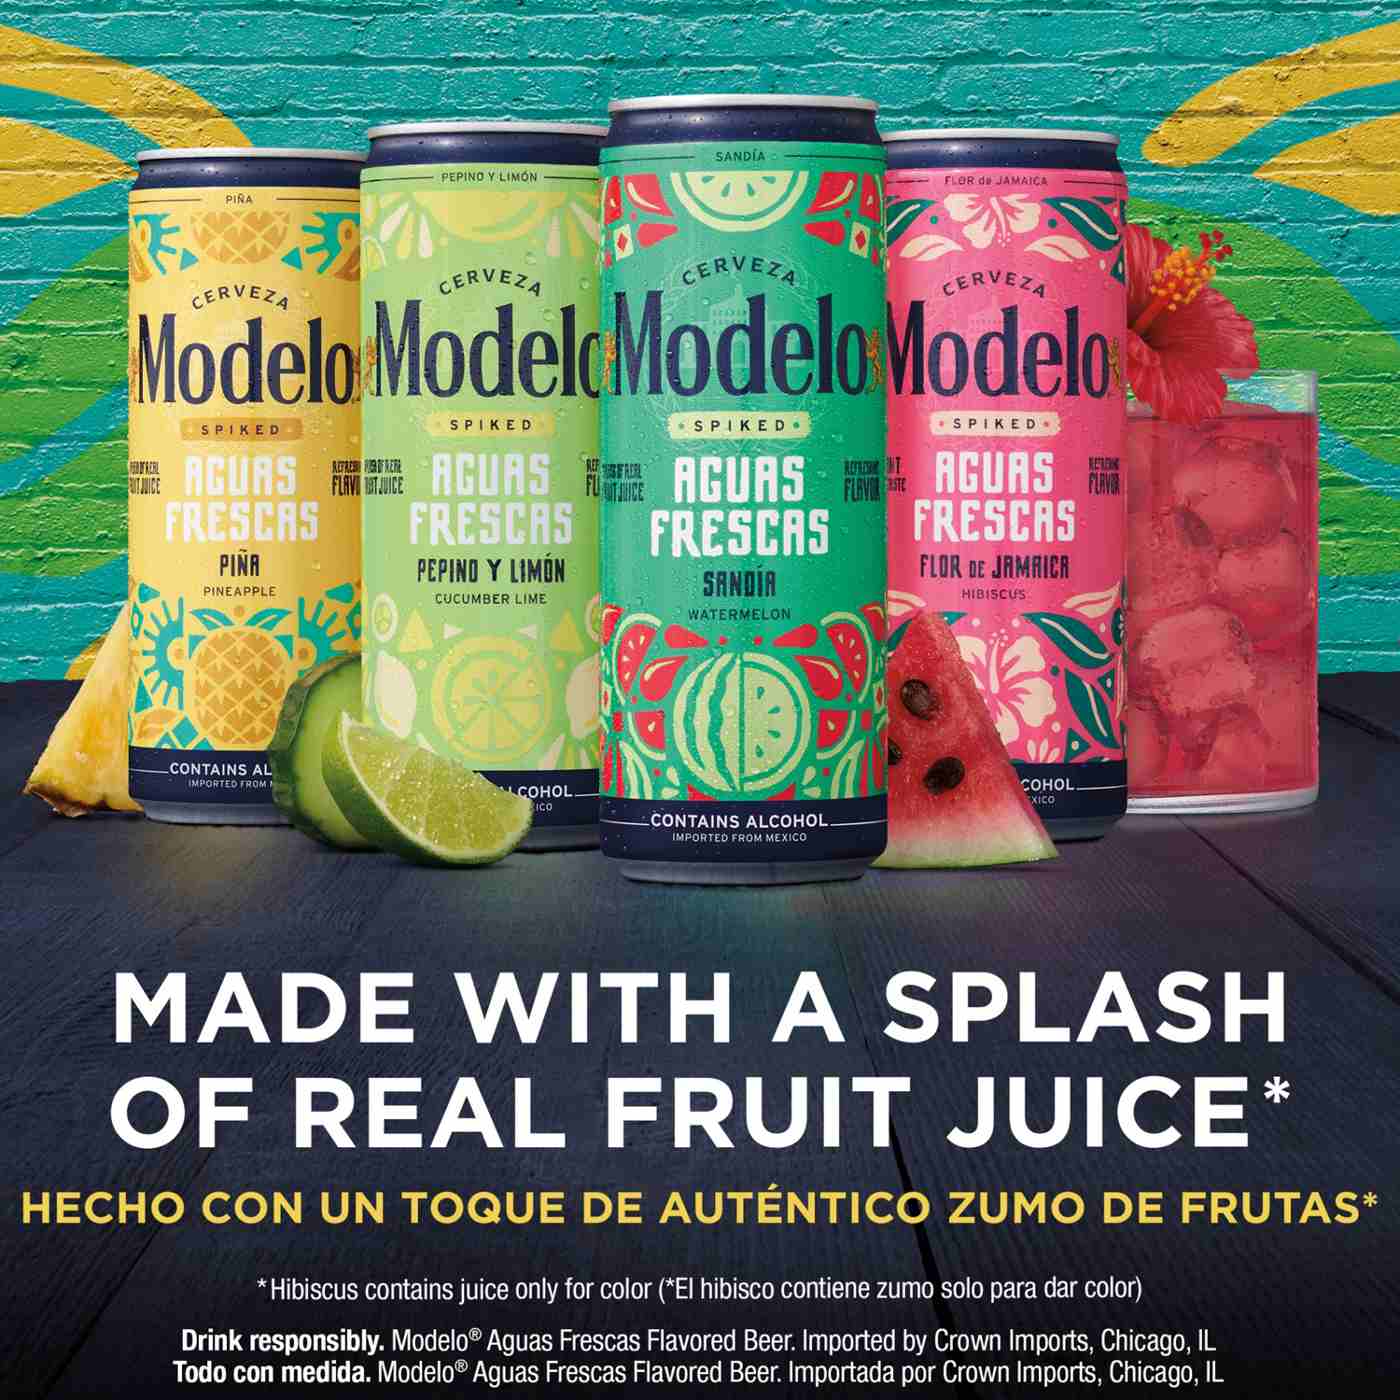 Modelo Spiked Aguas Frescas Spiked Frescas Variety Pack 12 pk Cans; image 7 of 8